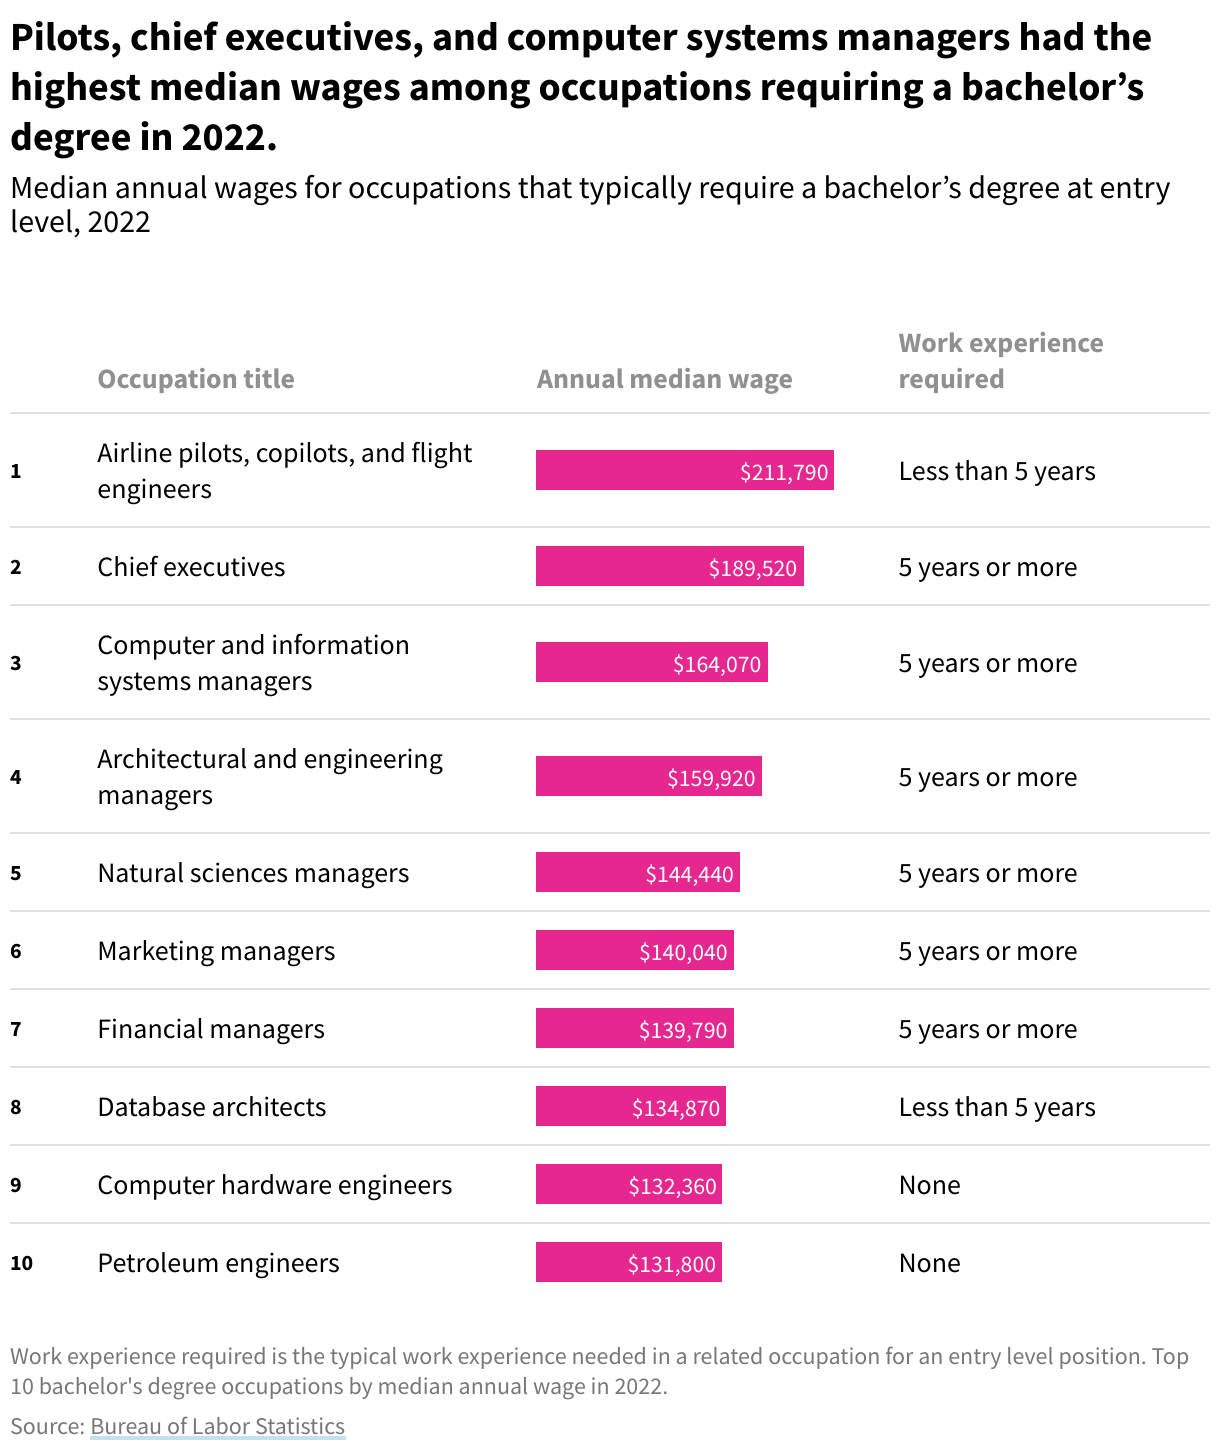 Median annual wages for occupations that typically require a bachelor’s degree at entry level, 2022. Pilots, chief executives, and computer systems managers had the highest median wages among occupations requiring a bachelor’s degree in 2022.